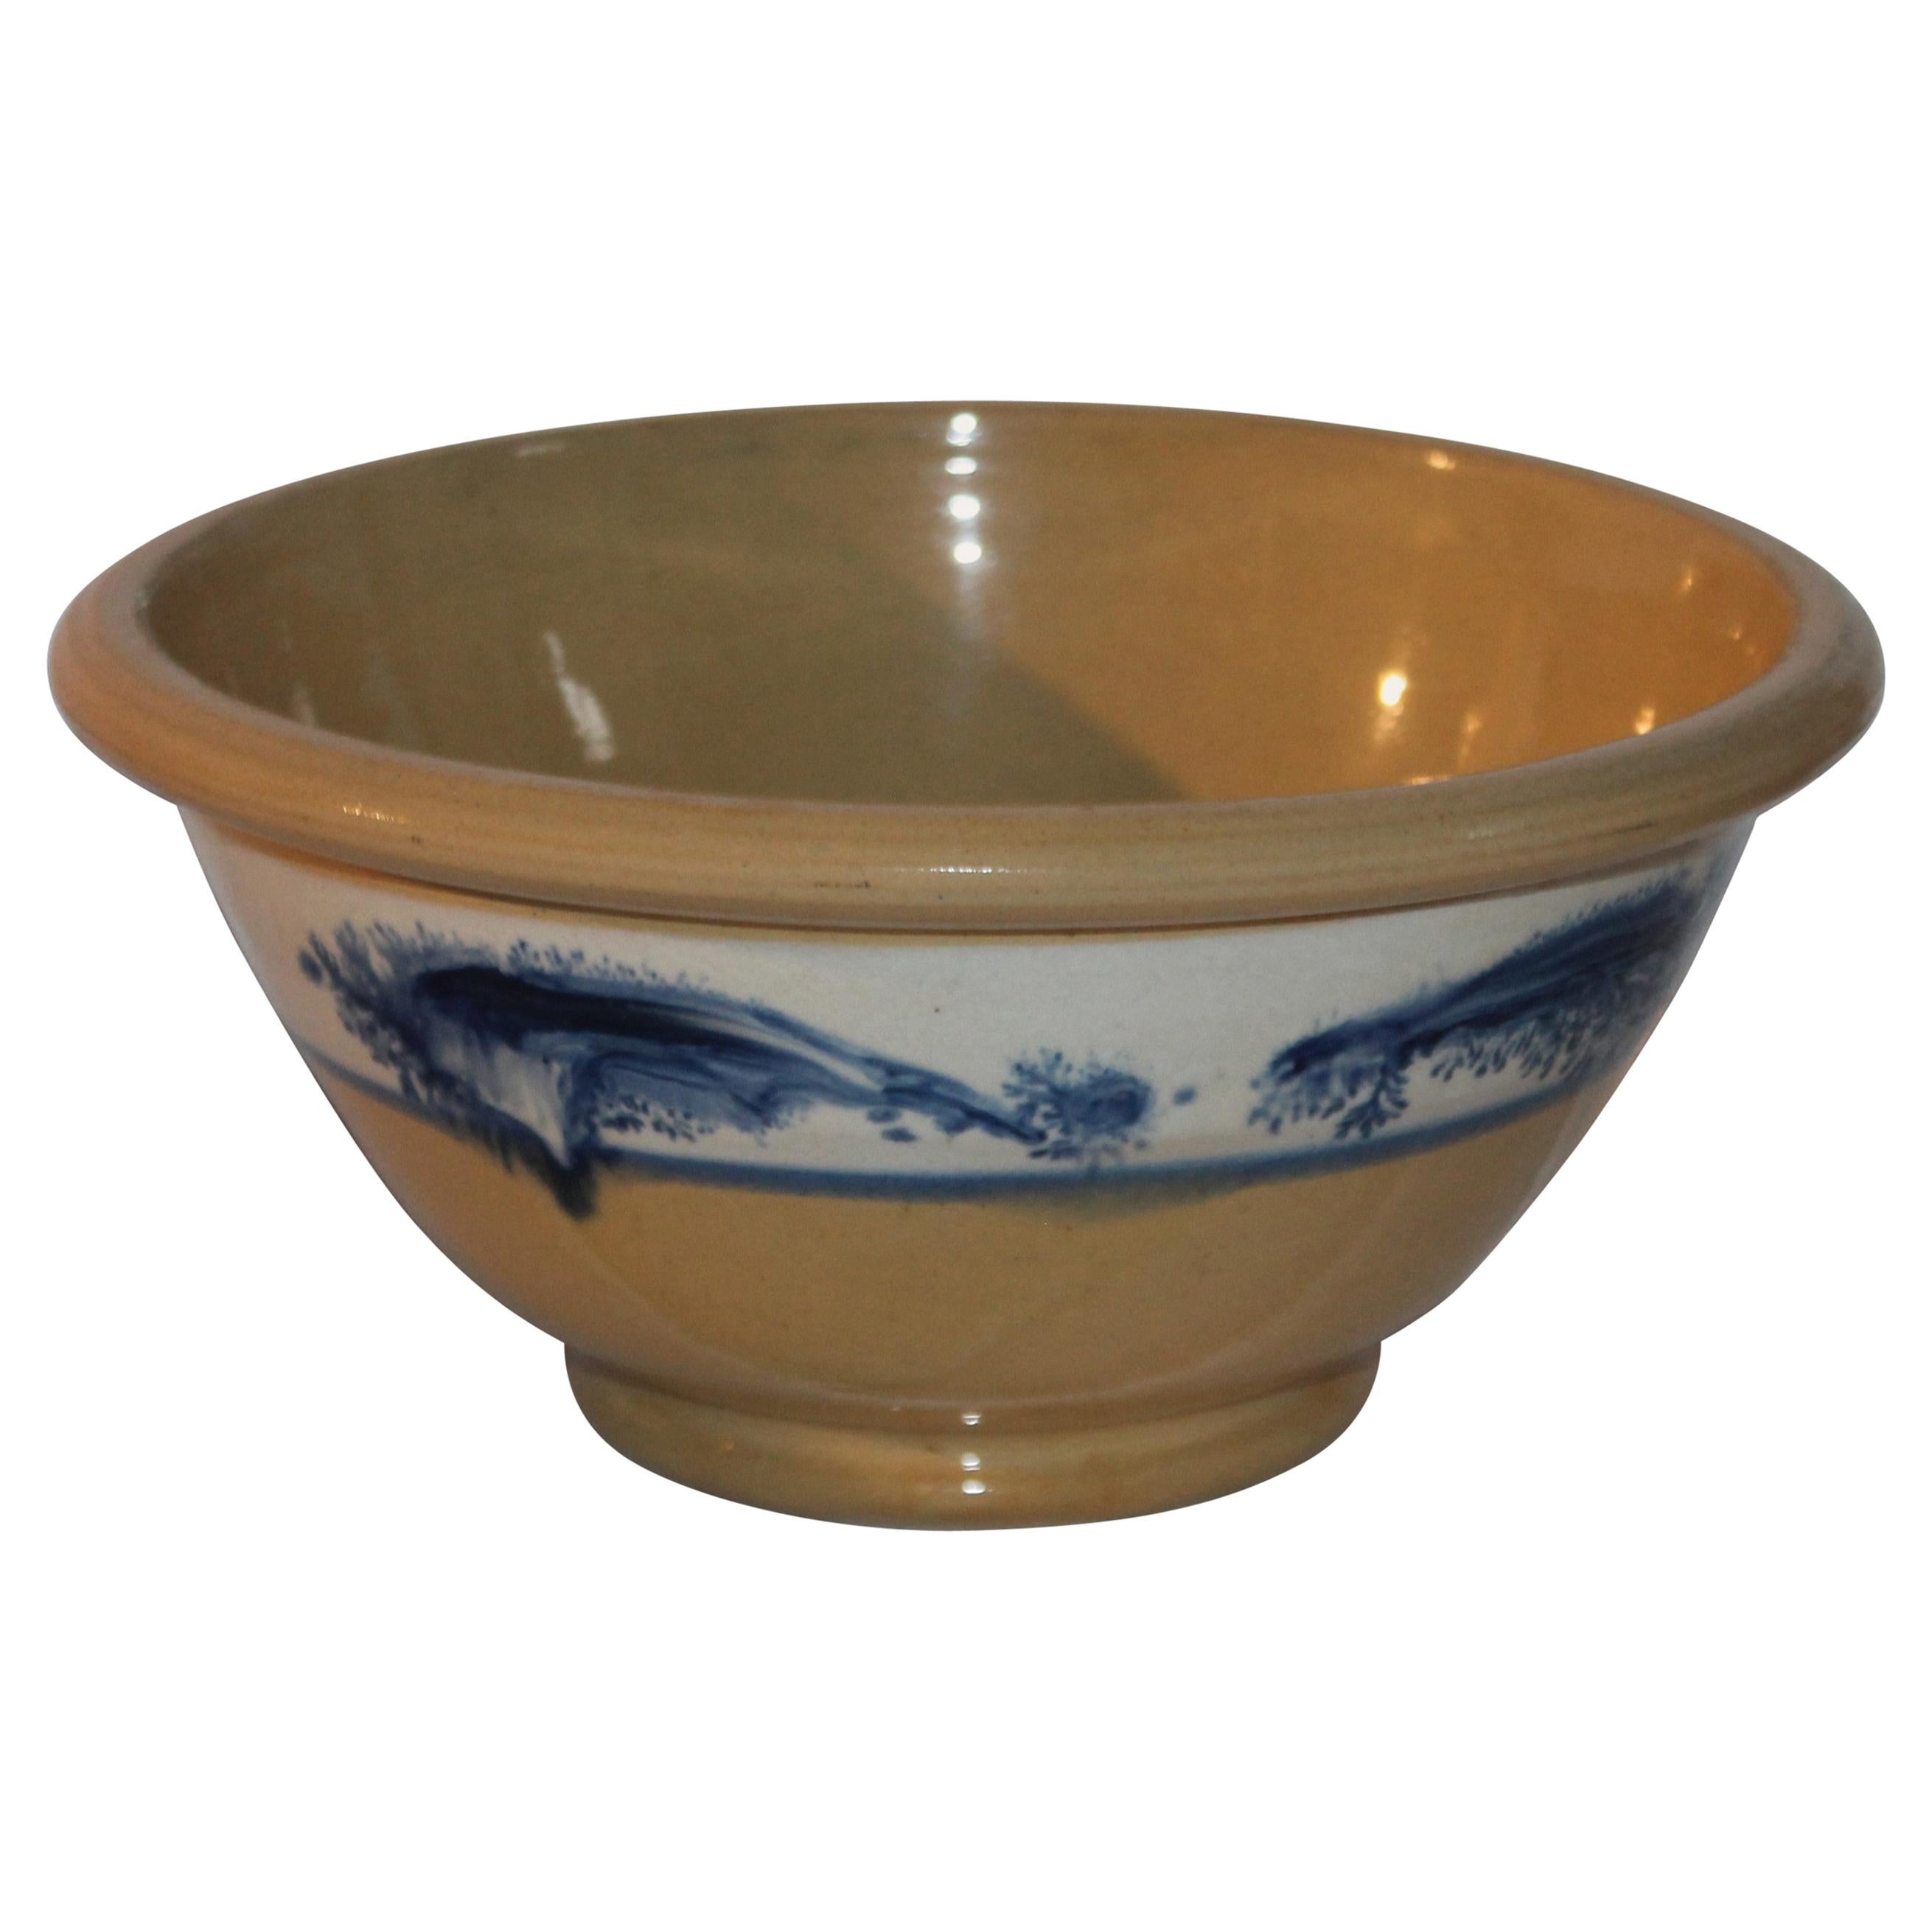 19th Century Mocha Blue Seaweed Yellow Ware Mixing Bowl For Sale